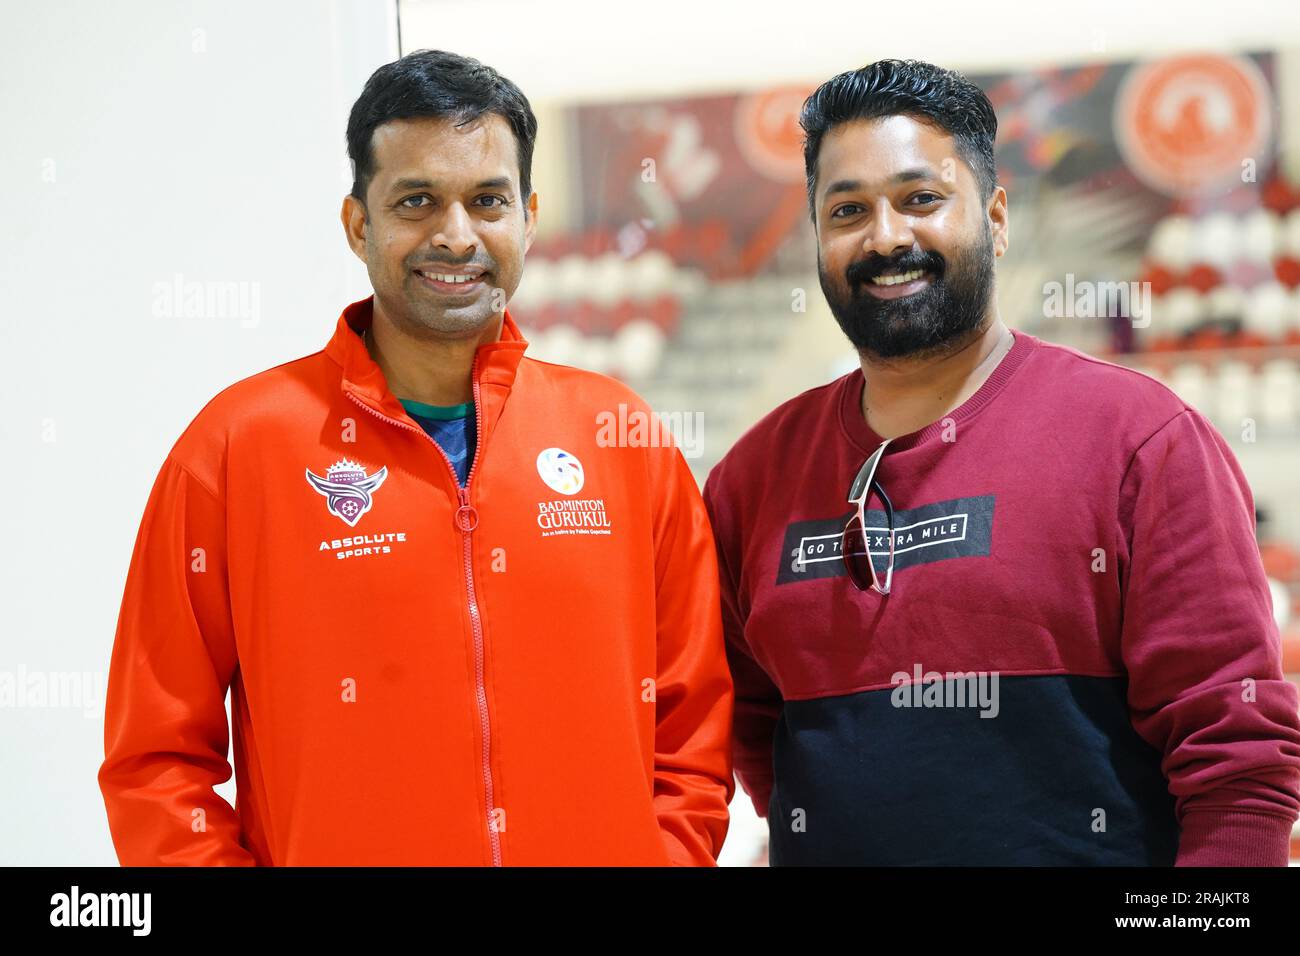 Indian badminton legend Pullela Gopichand poses for a picture with a Indian physical education teacher based in Qatar durng his visit to Qatar. Stock Photo